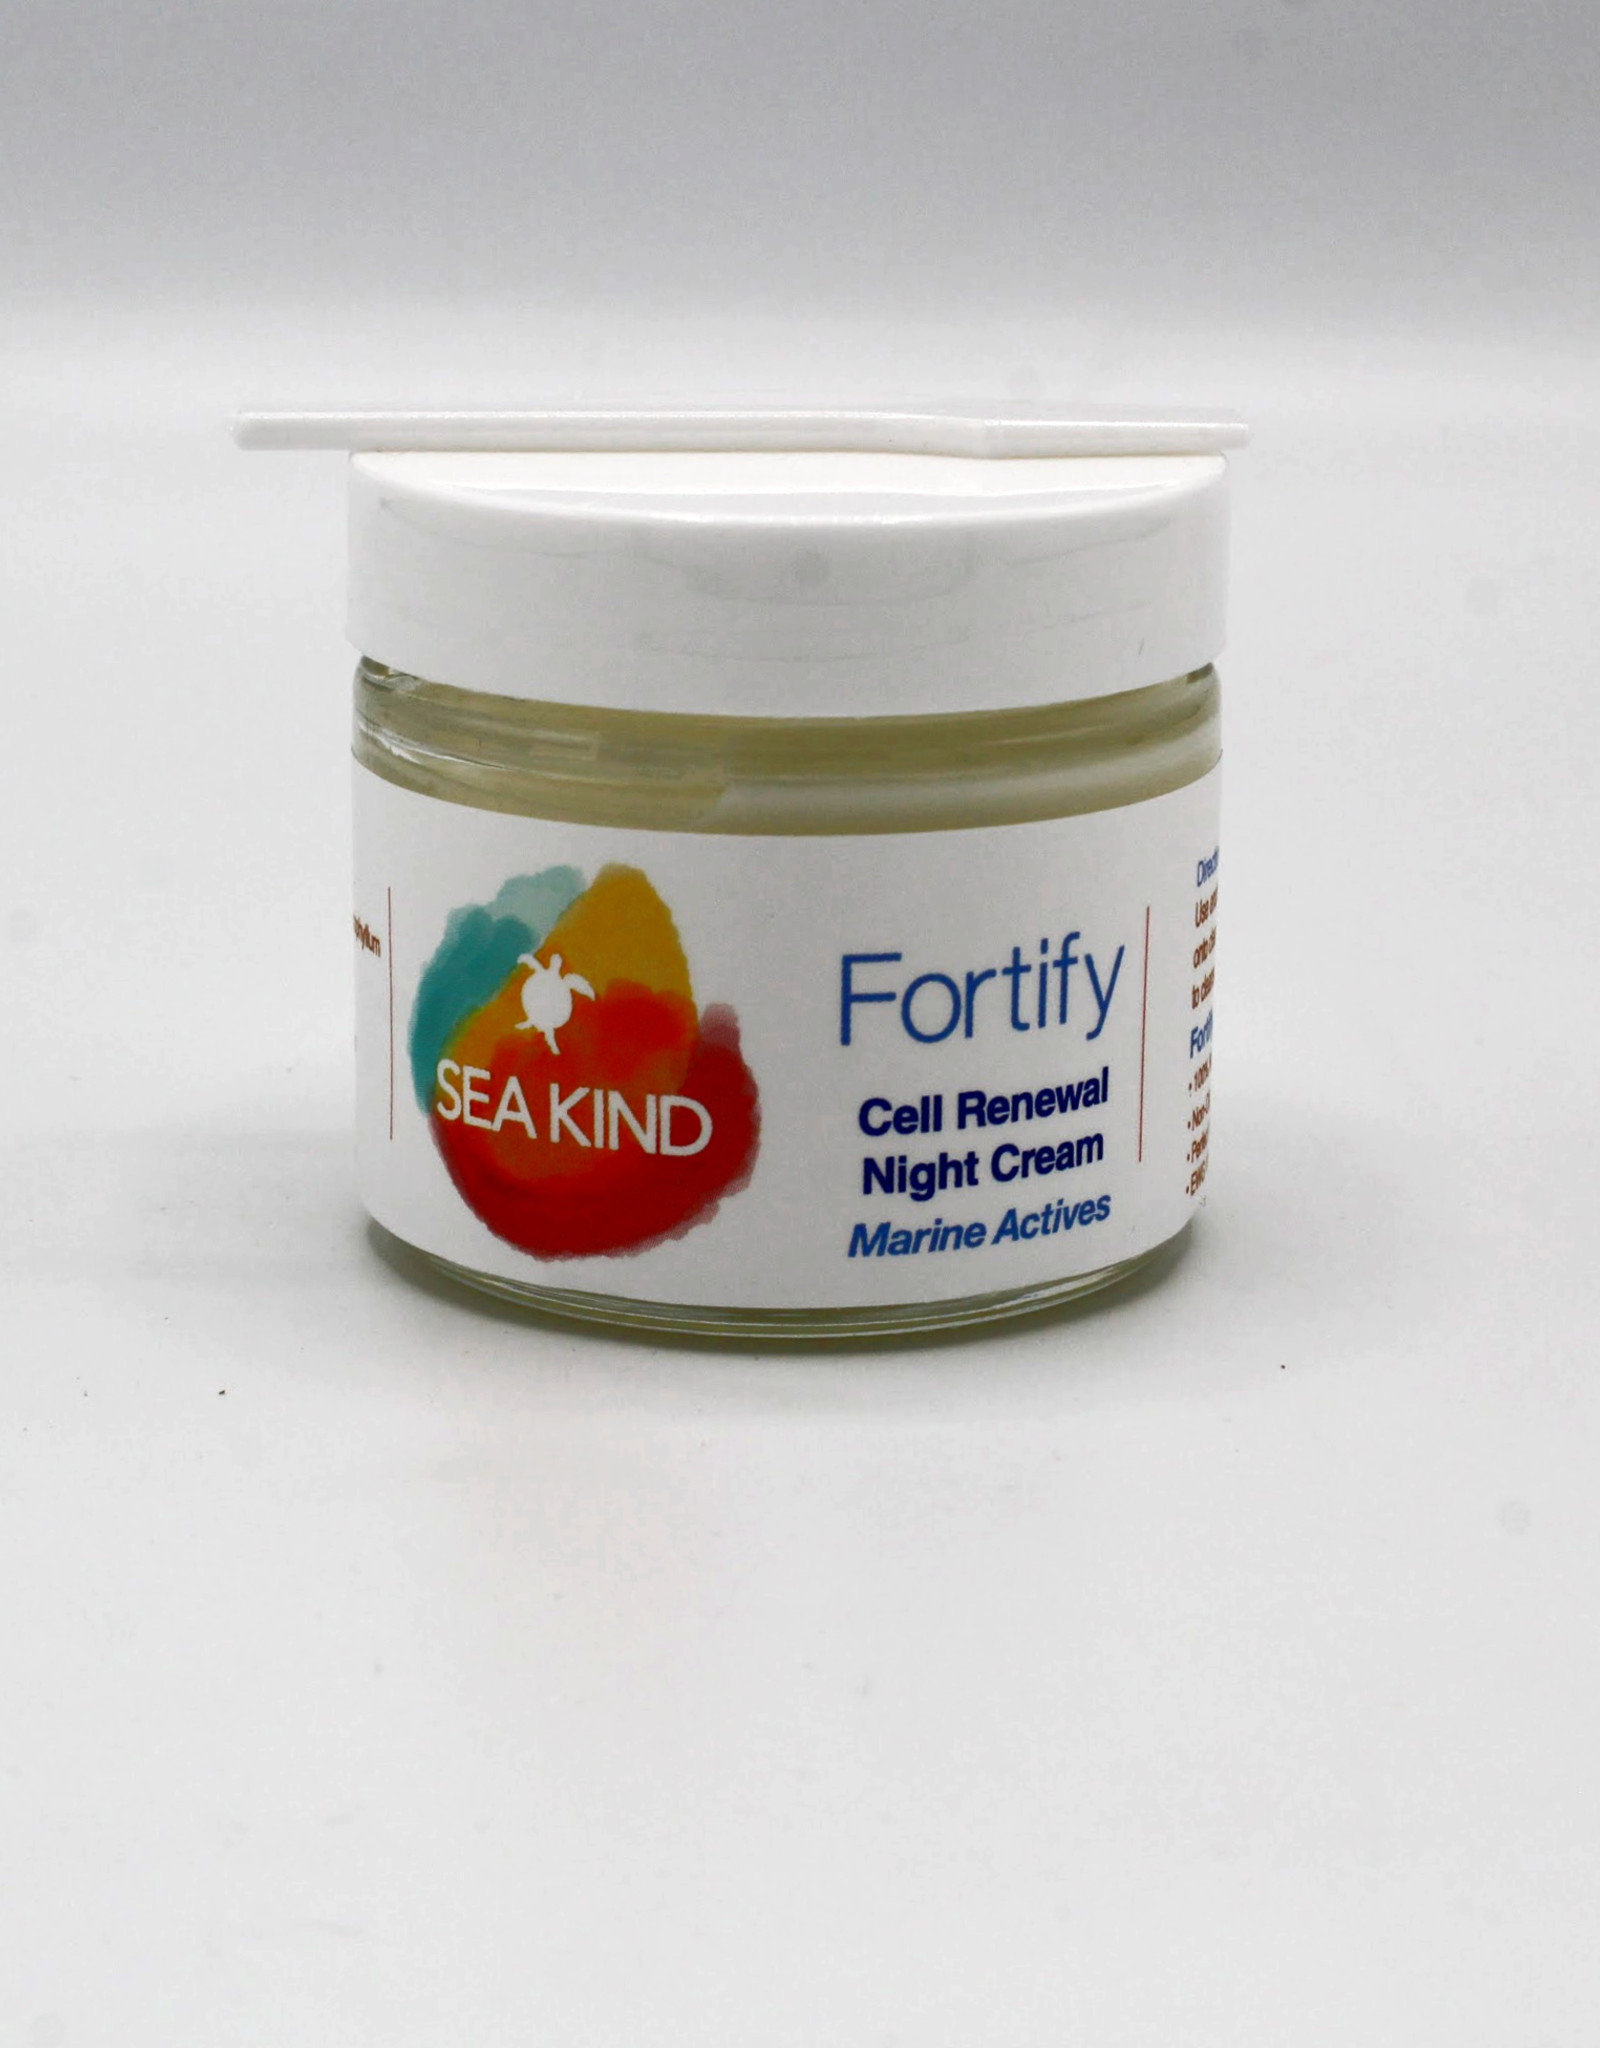 Fortify Cell Renewal Night Cream